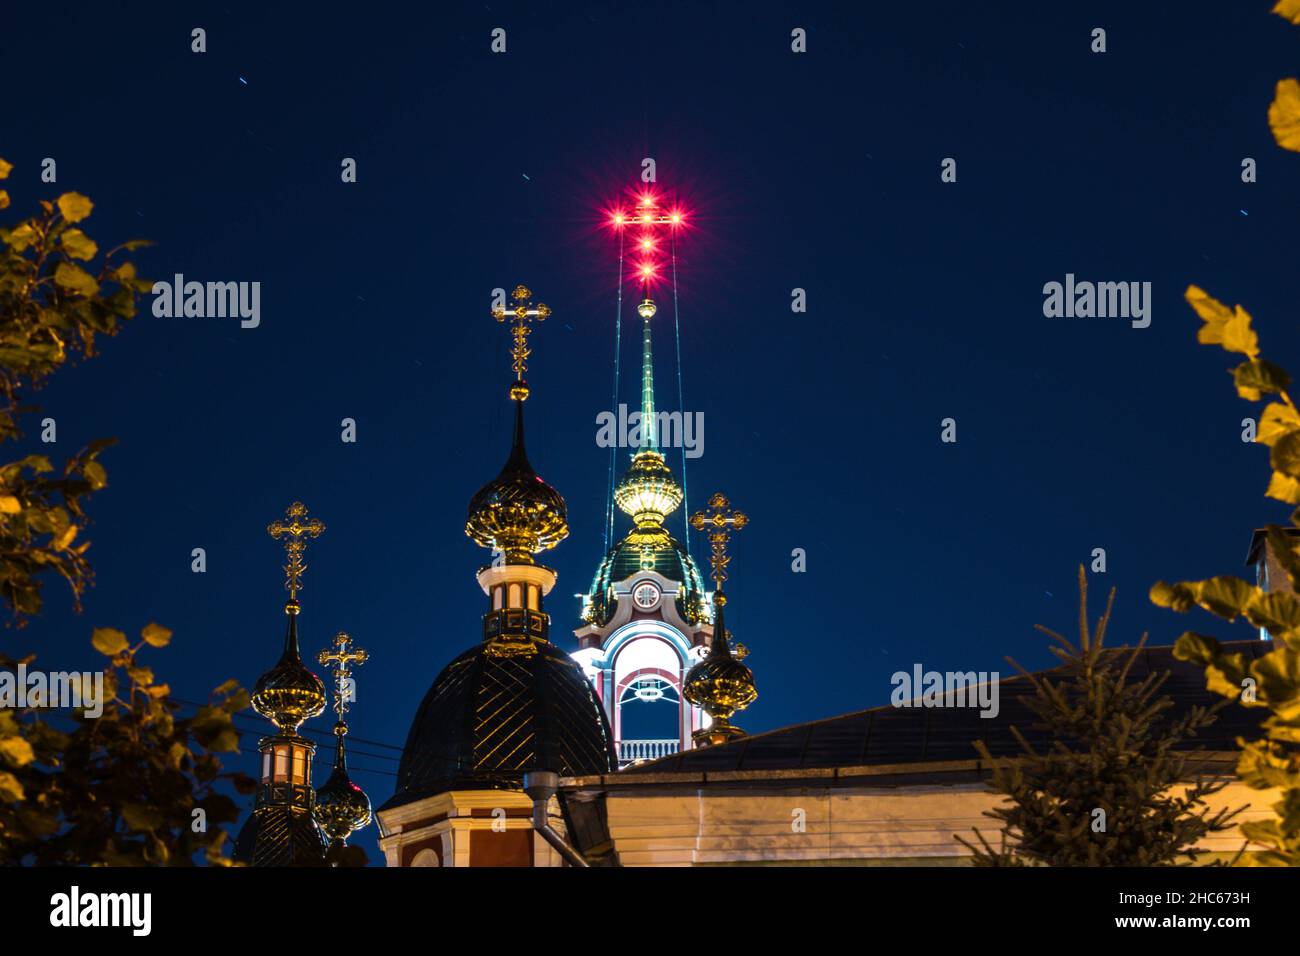 Dome of the church with the cross with night sky on the background in Tambov, Russia Stock Photo